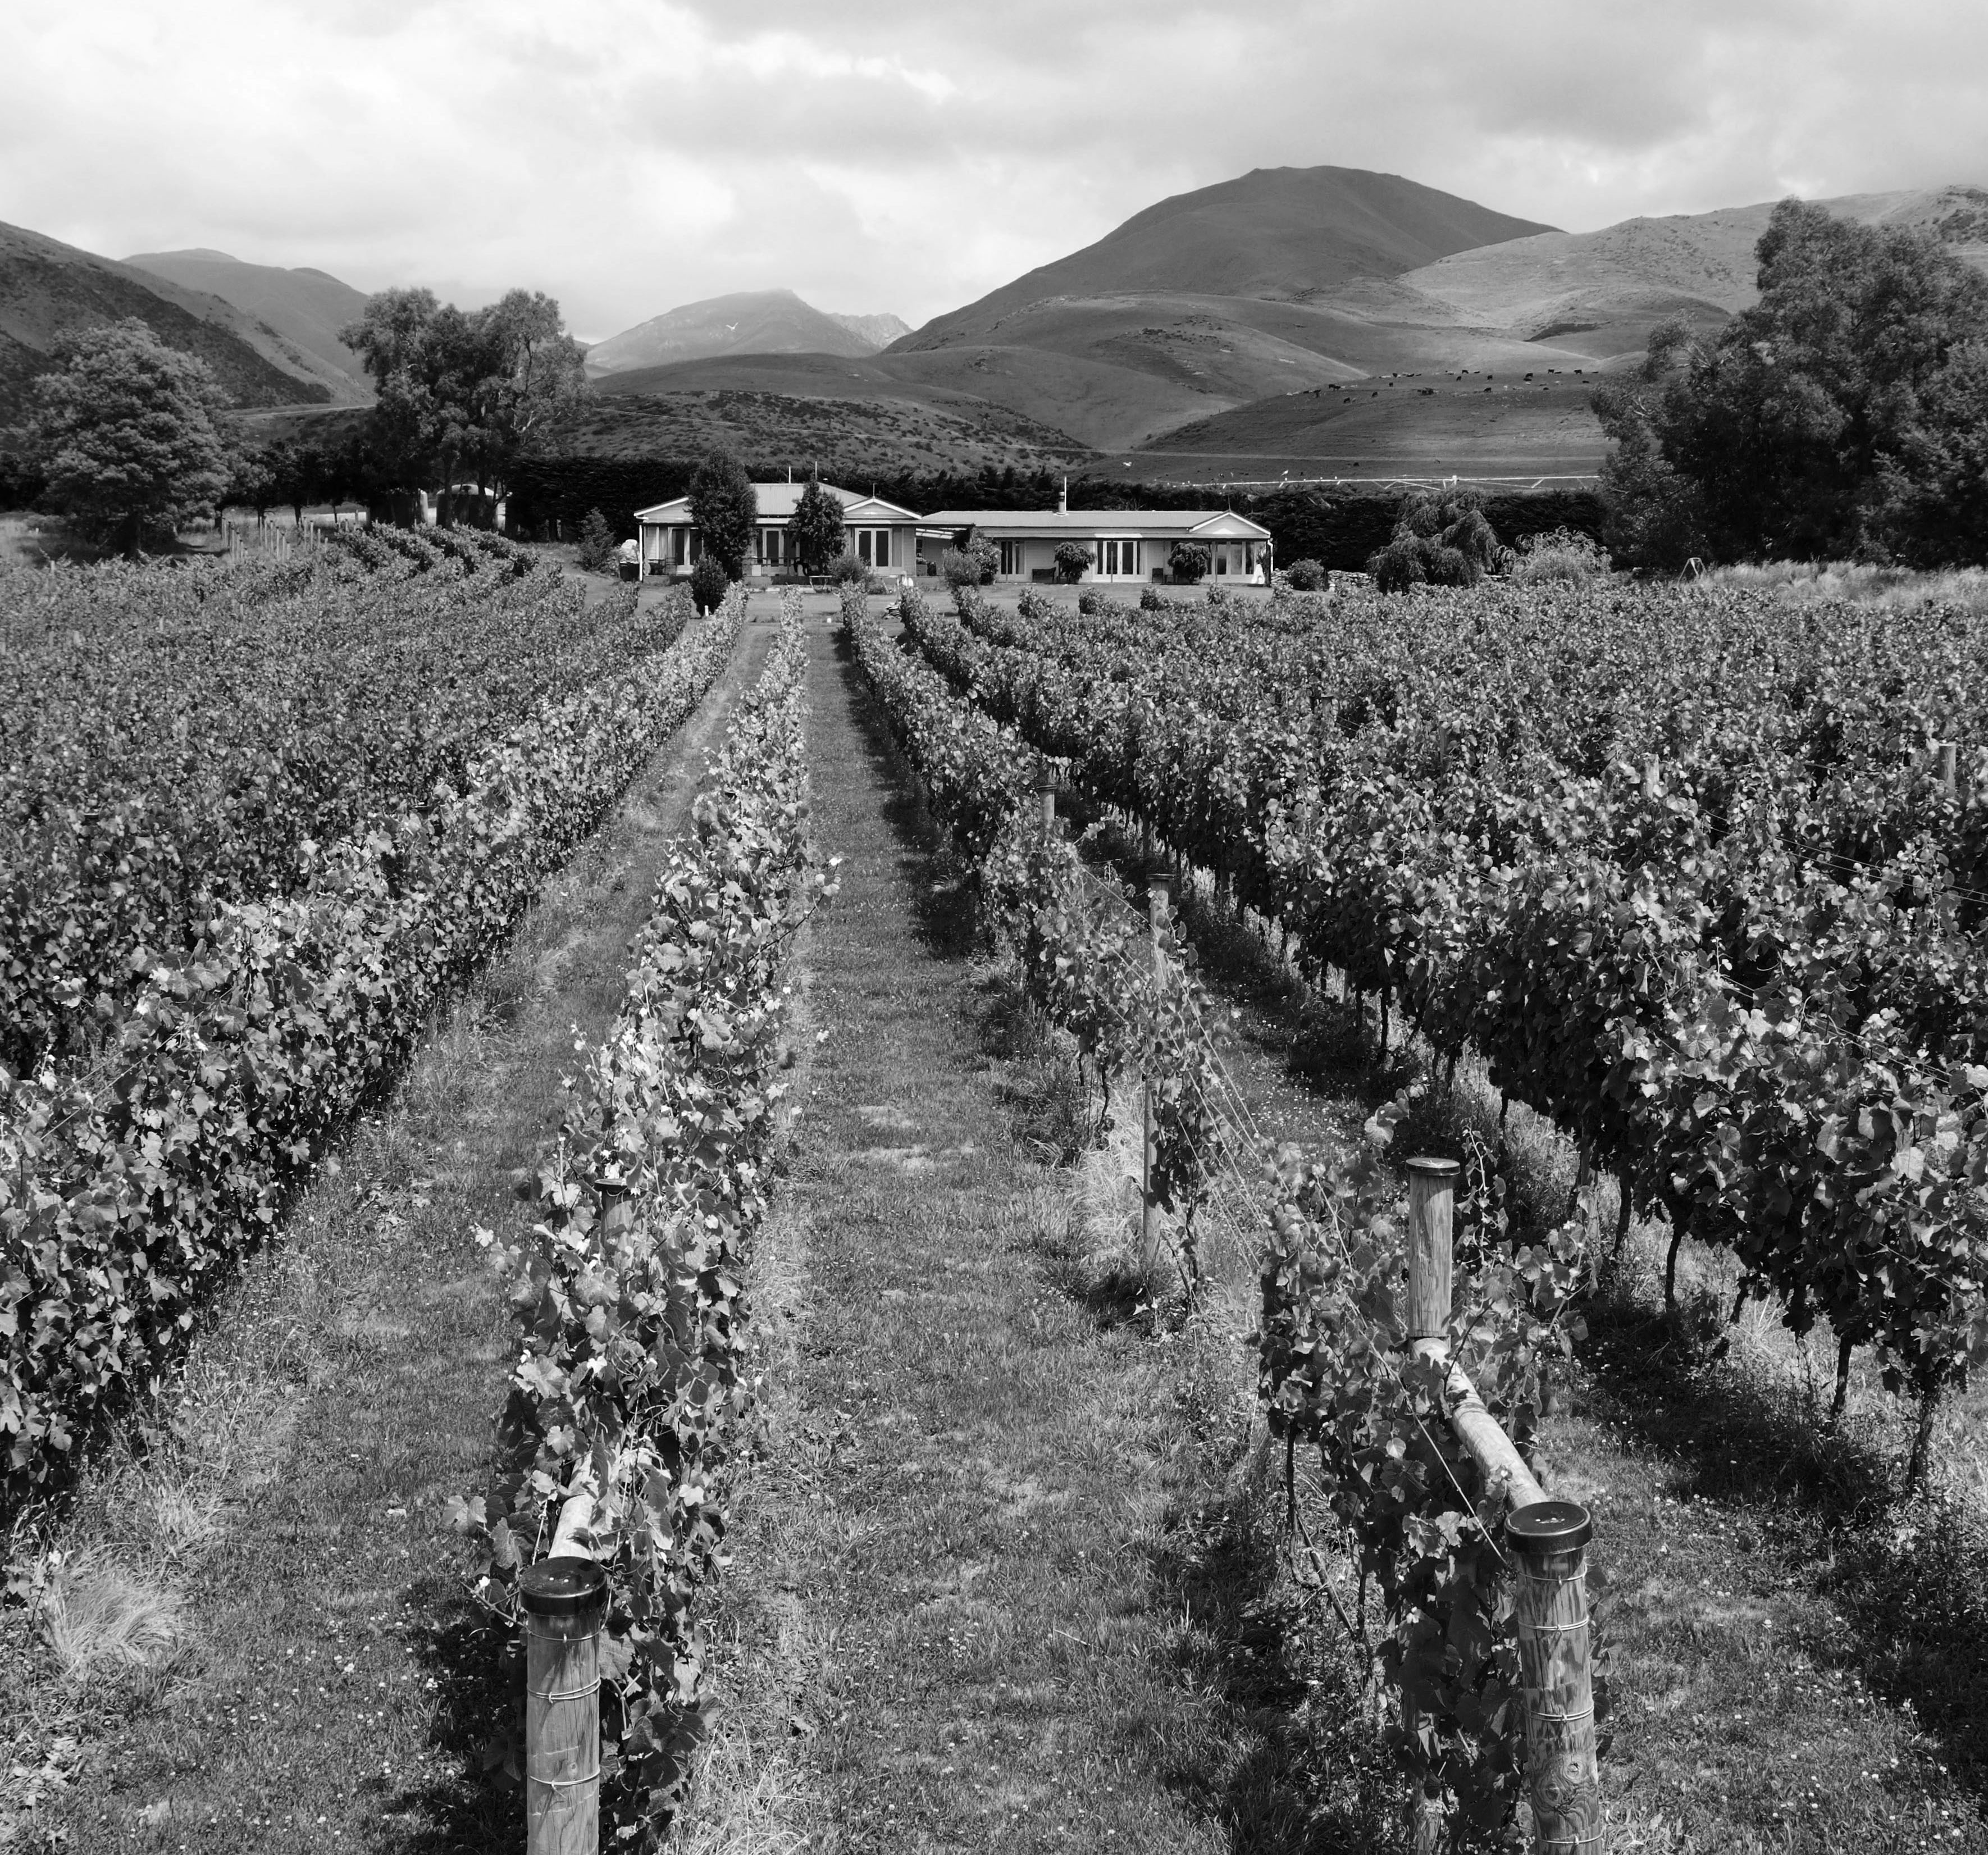 Row of grapevines in the Sublime vineyard